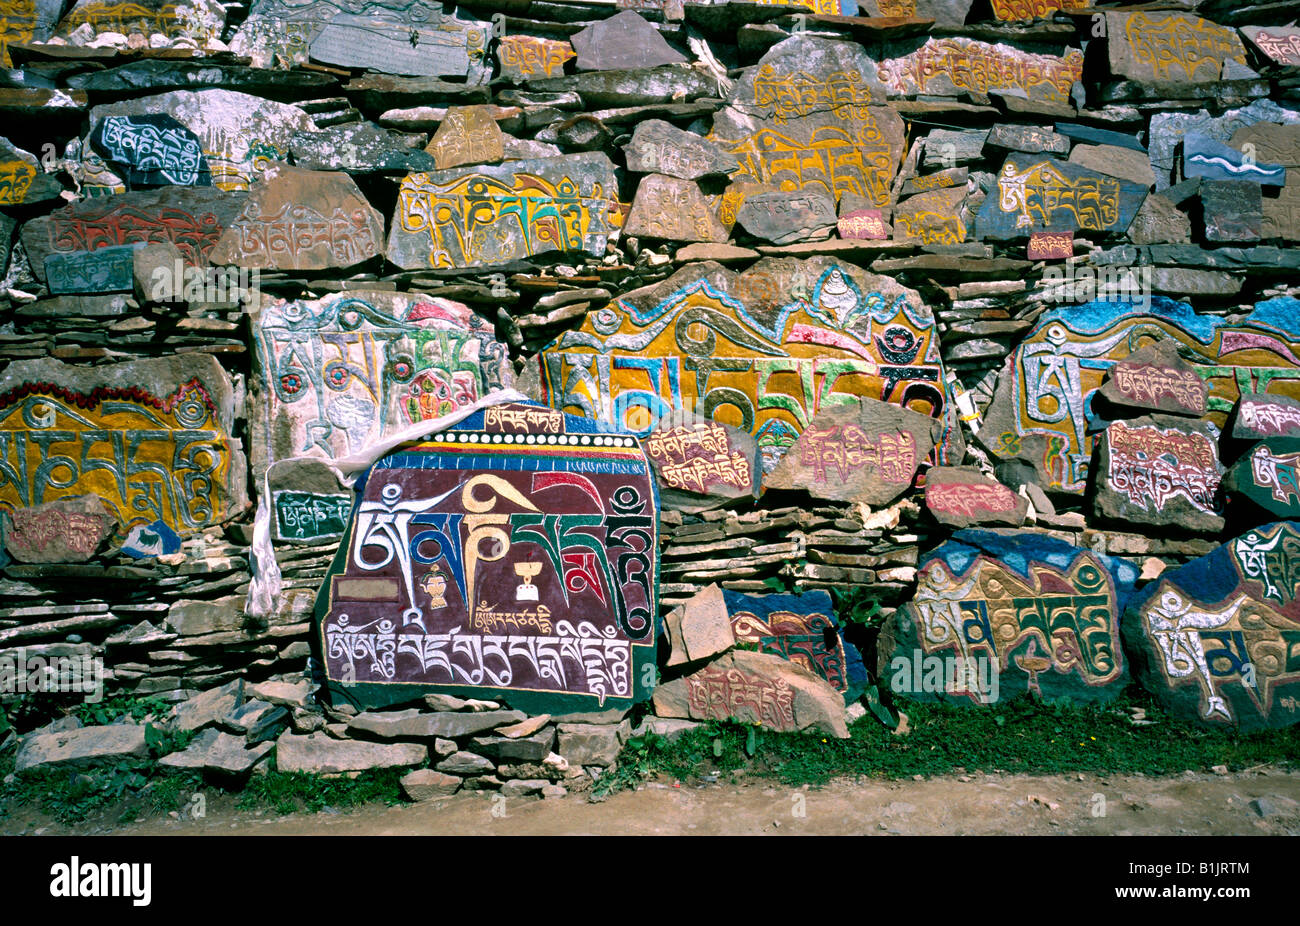 Aug 8, 2006 - Huge pile of Mani stones at Chöde Gompa monastery in the town of Litang in Tibetan China. Stock Photo